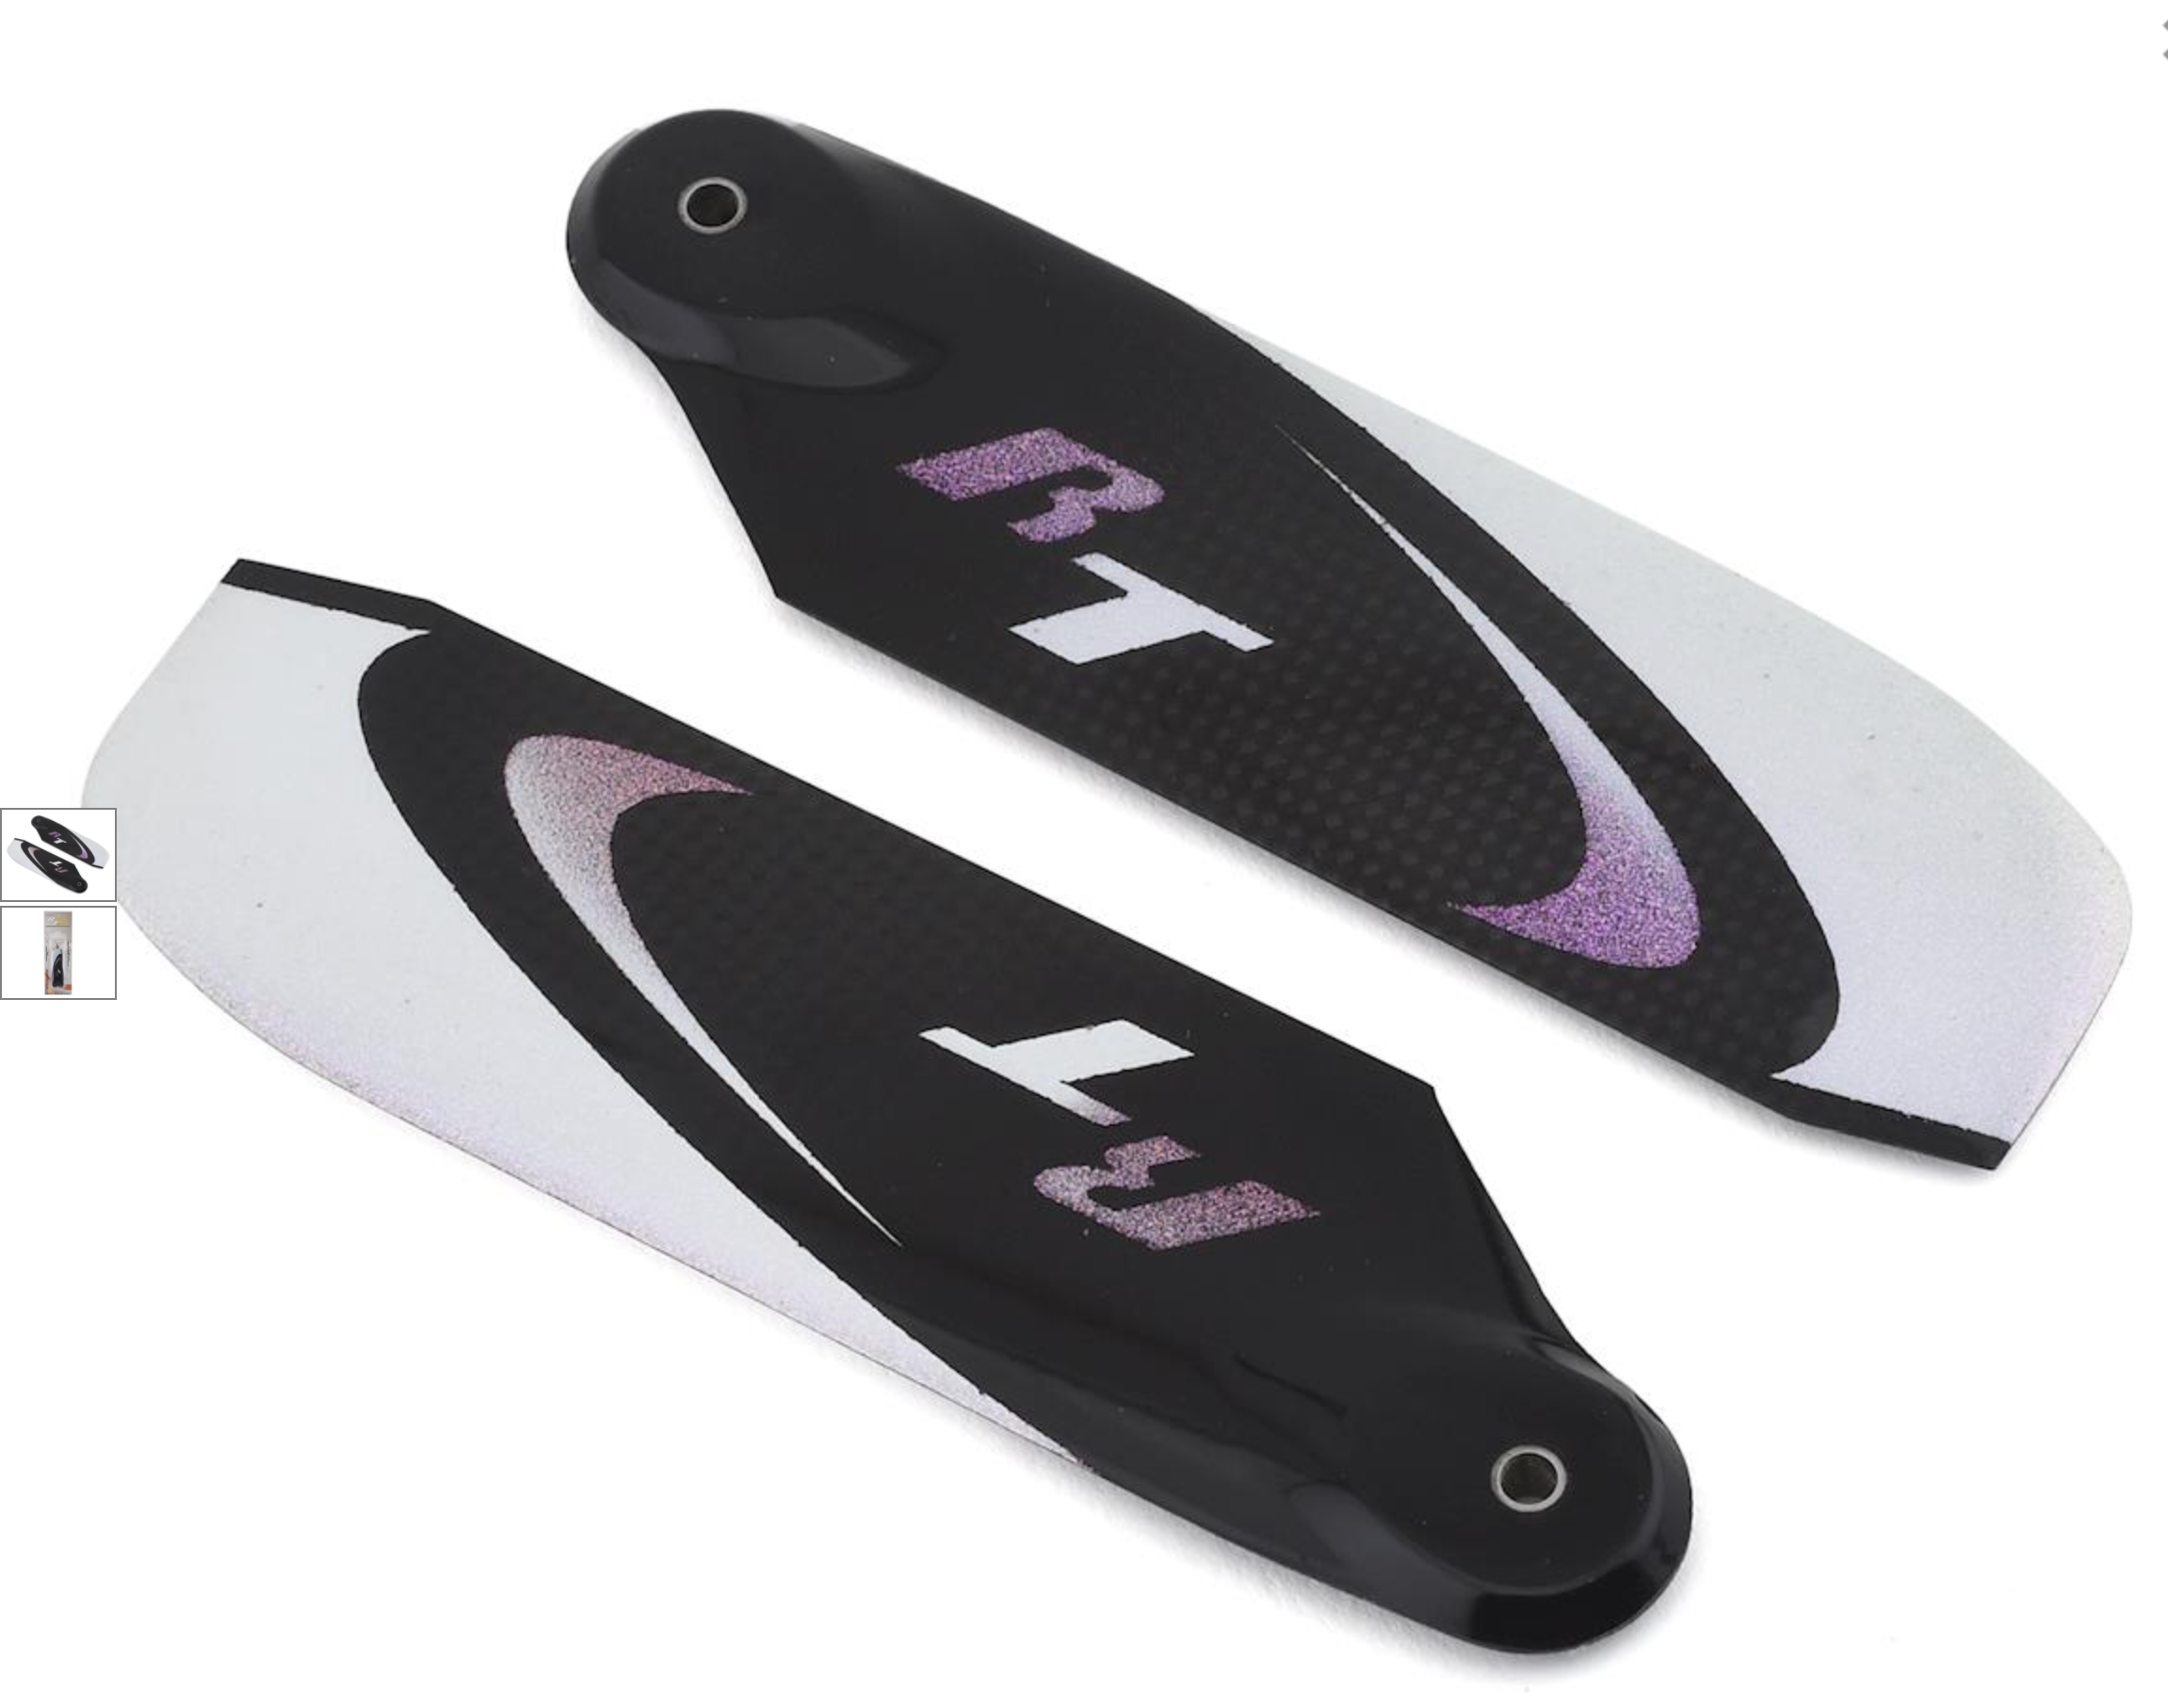 RotorTech 106mm "Ultimate" Tail Rotor Blade Set